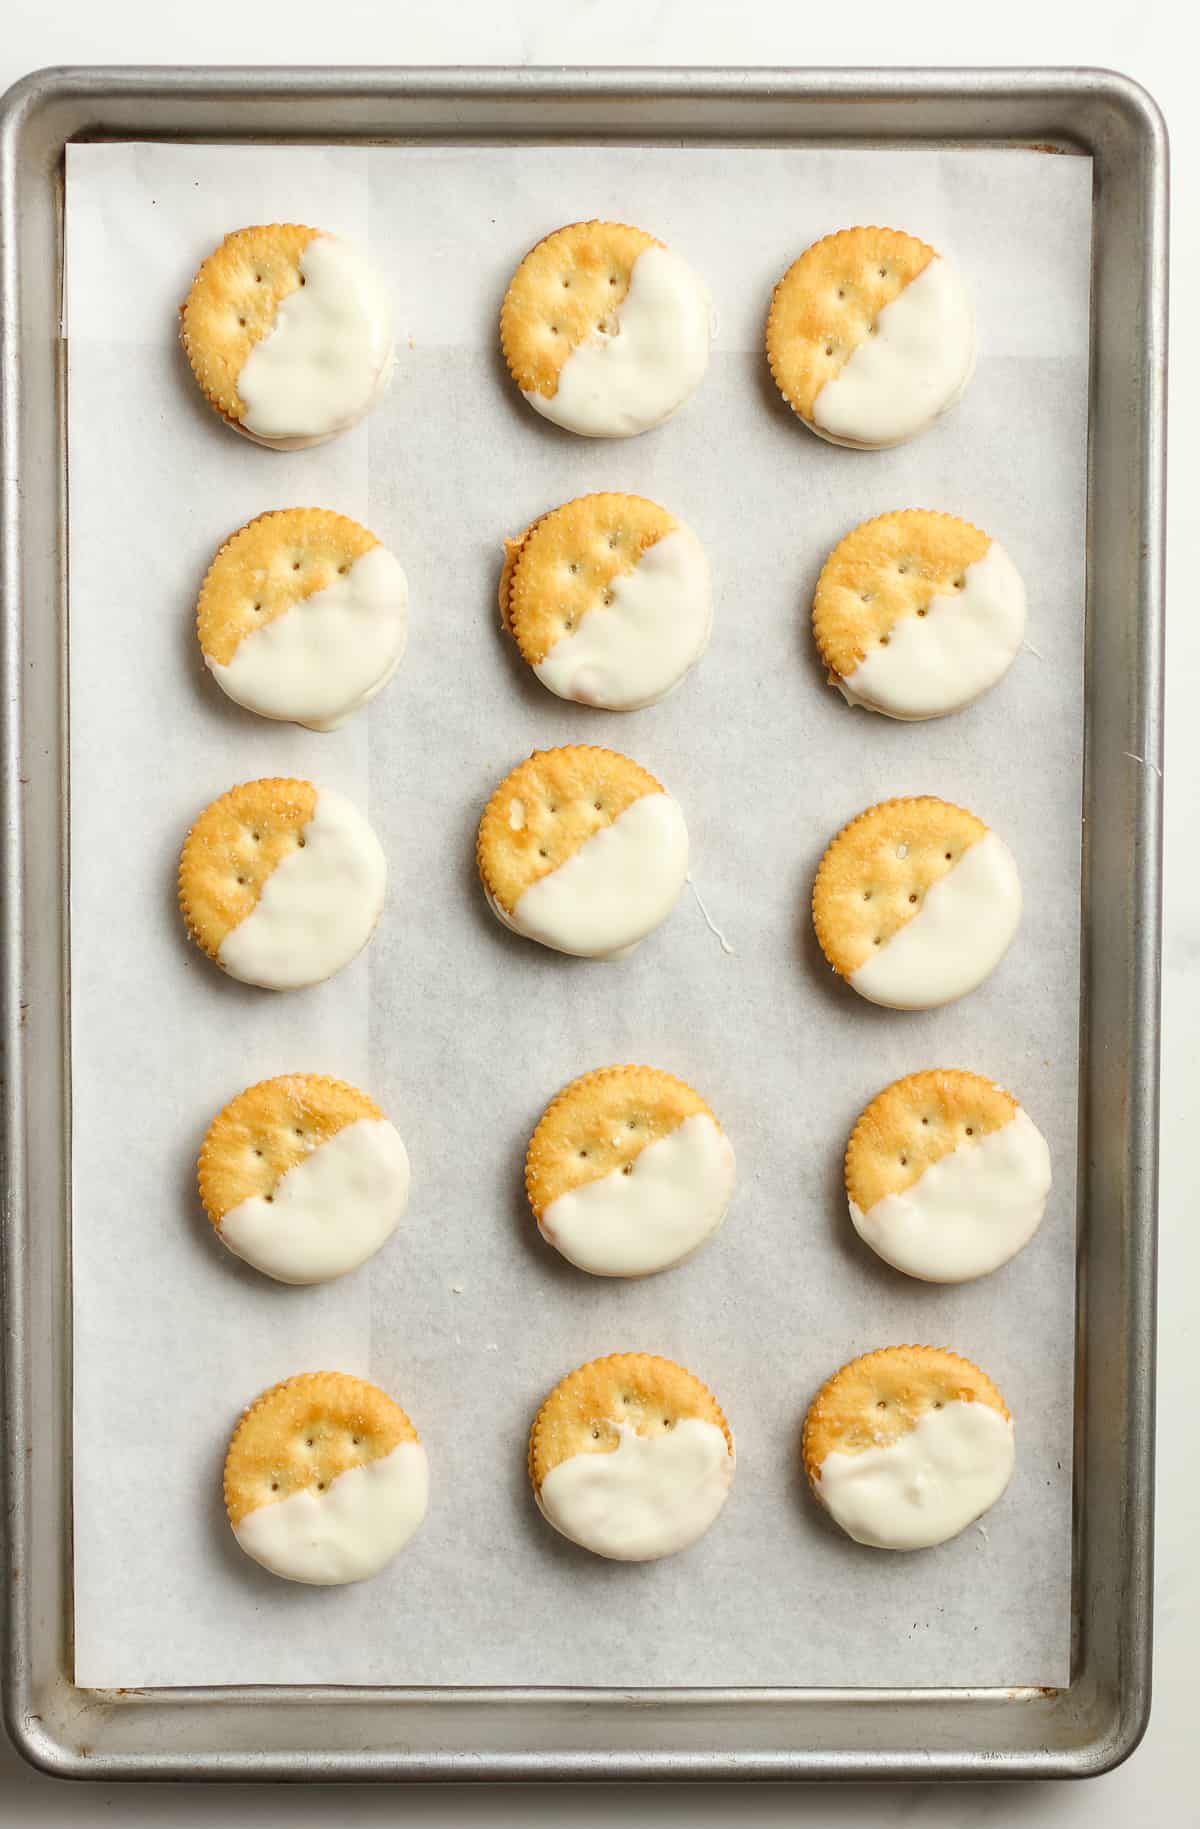 A pan of cookies with half covered in white chocolate.